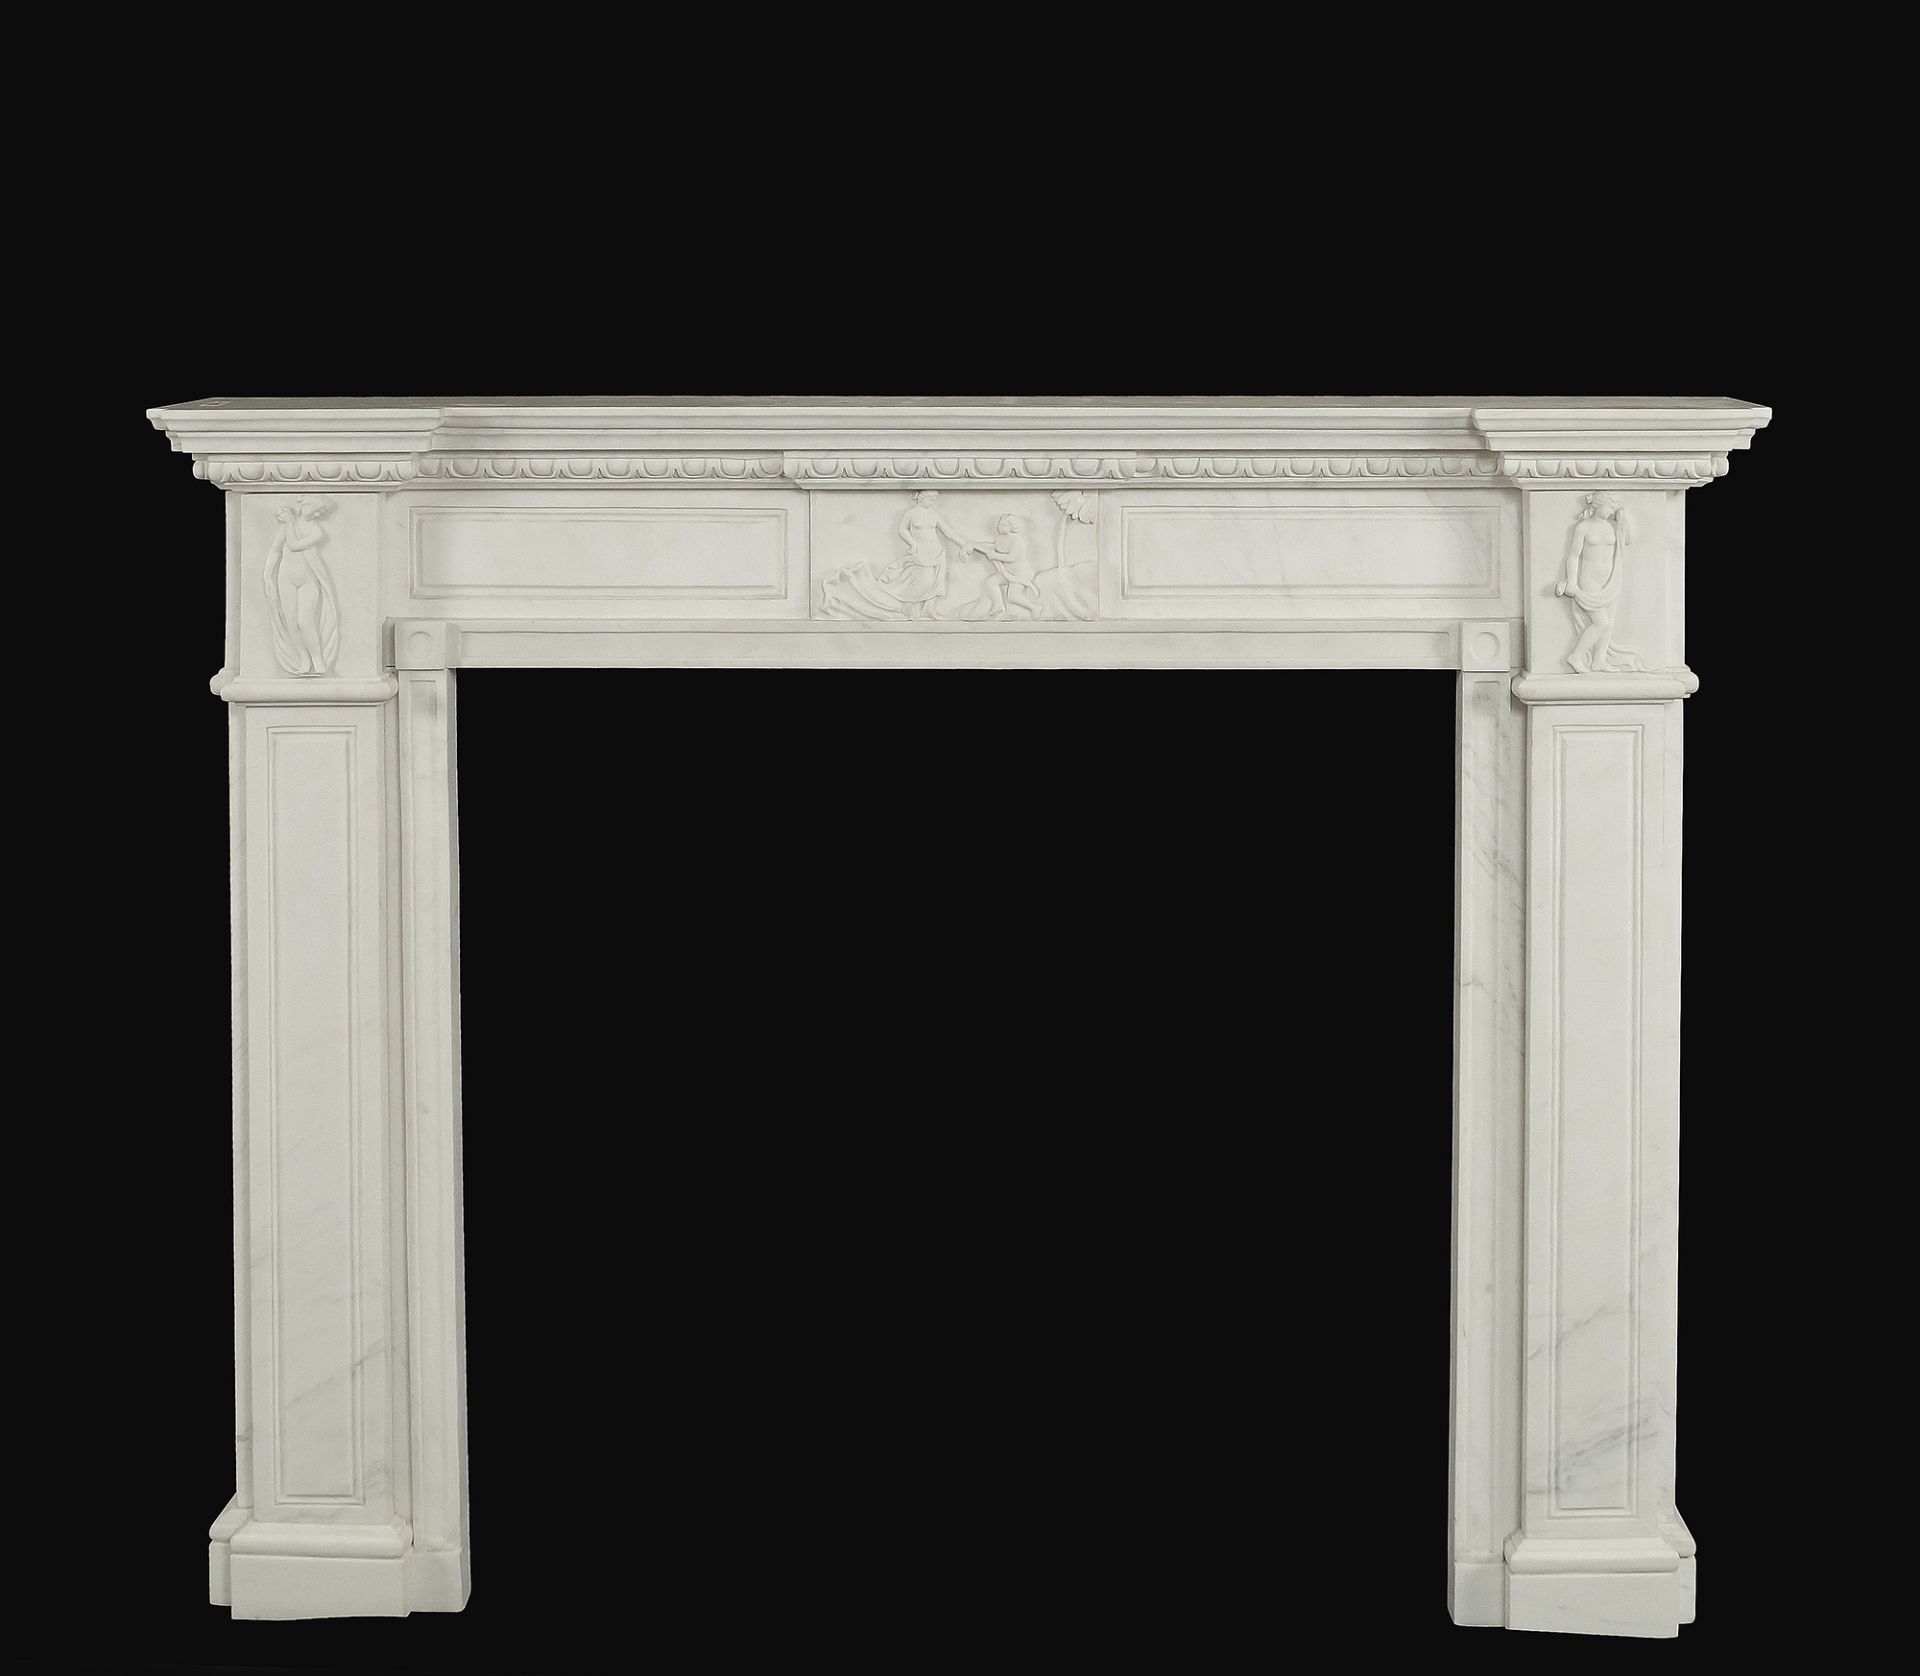 A white marble chimney